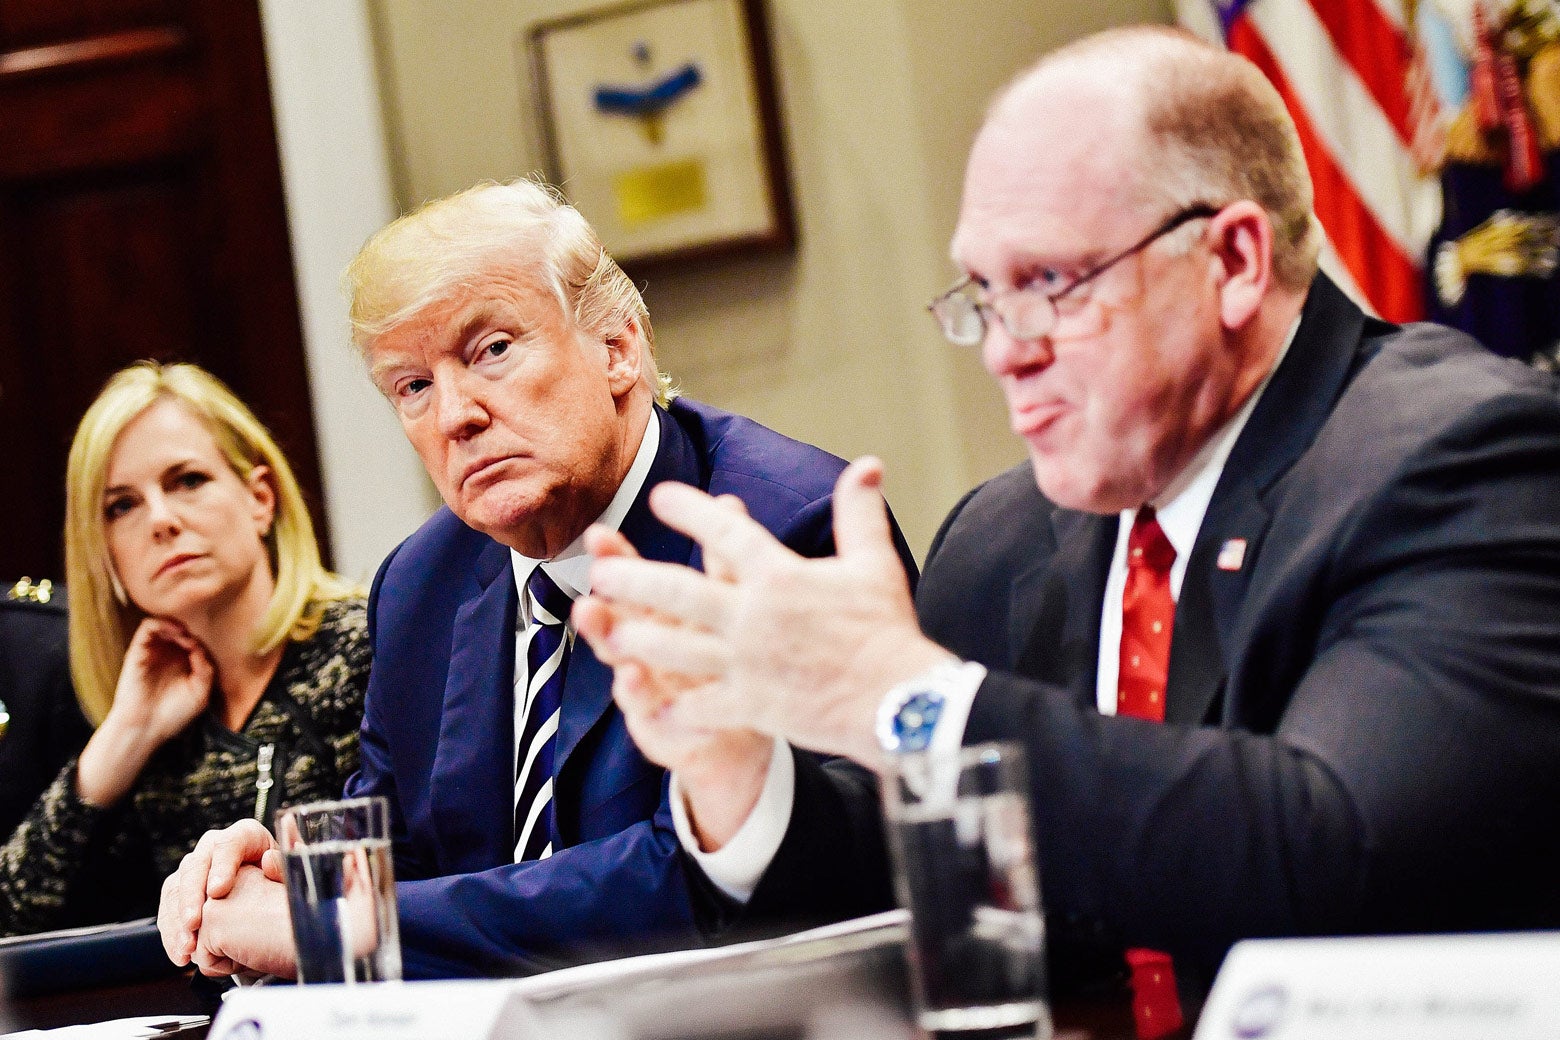 Kirstjen Nielsen, Donald Trump, and Thomas Homan at a conference table.